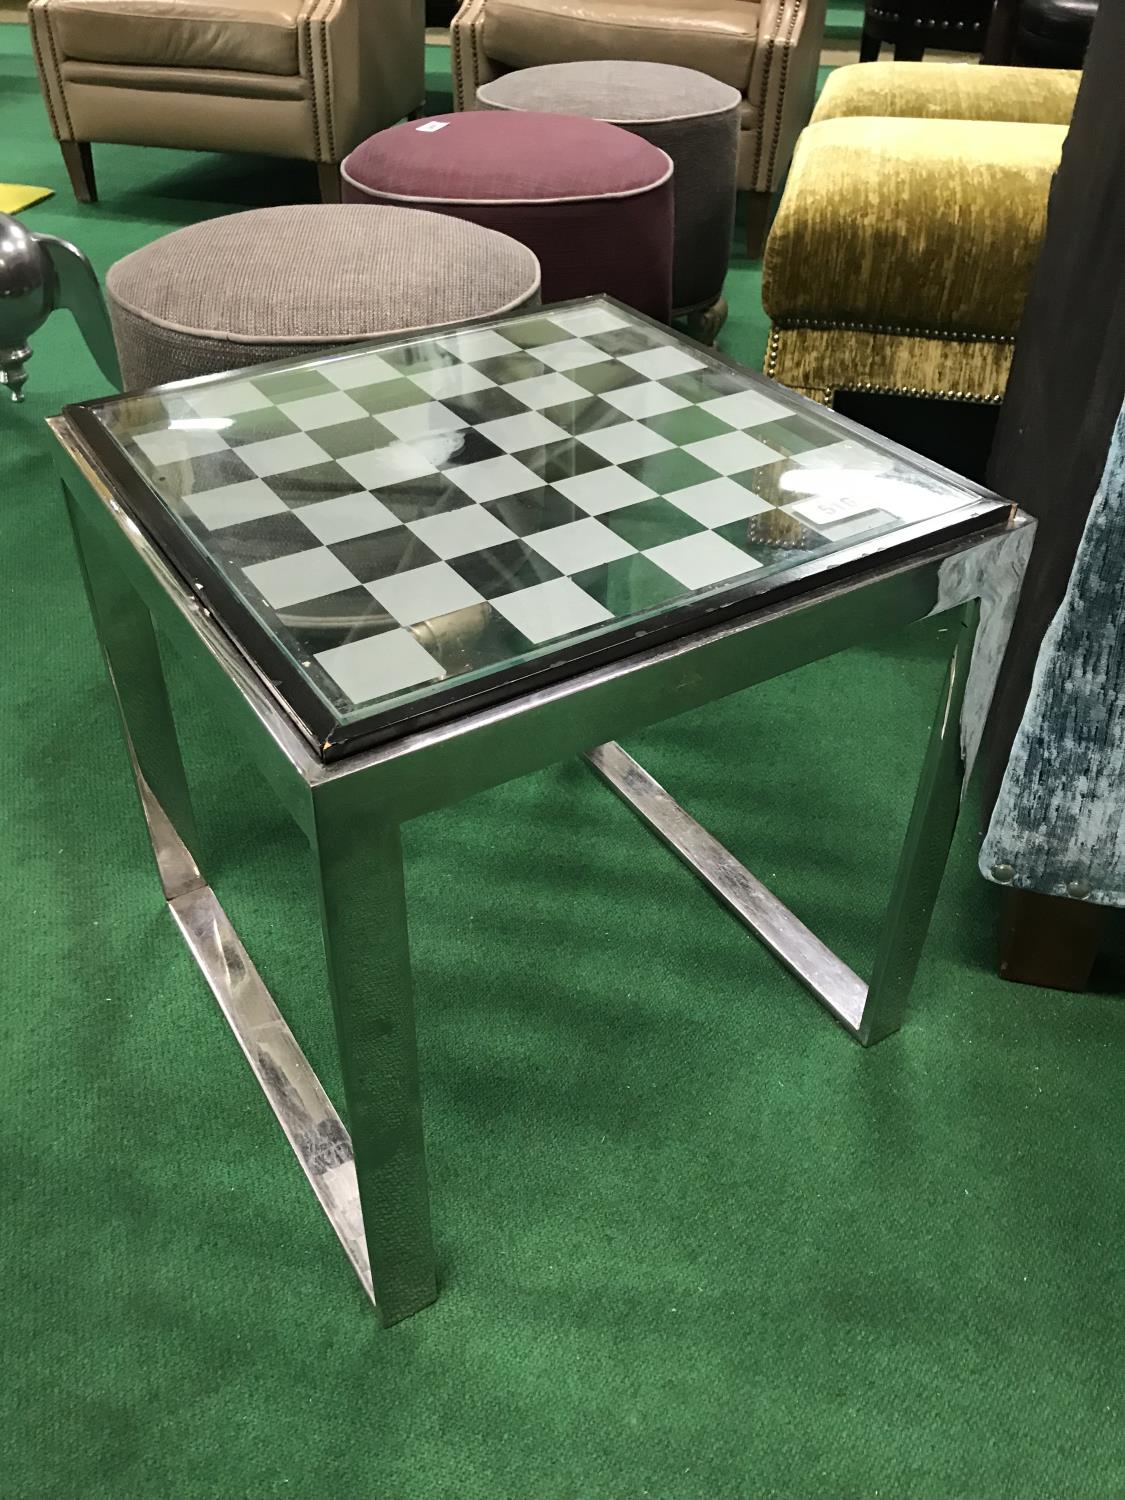 Ex Dylan Hotel Chrome and brass chess table 18" high